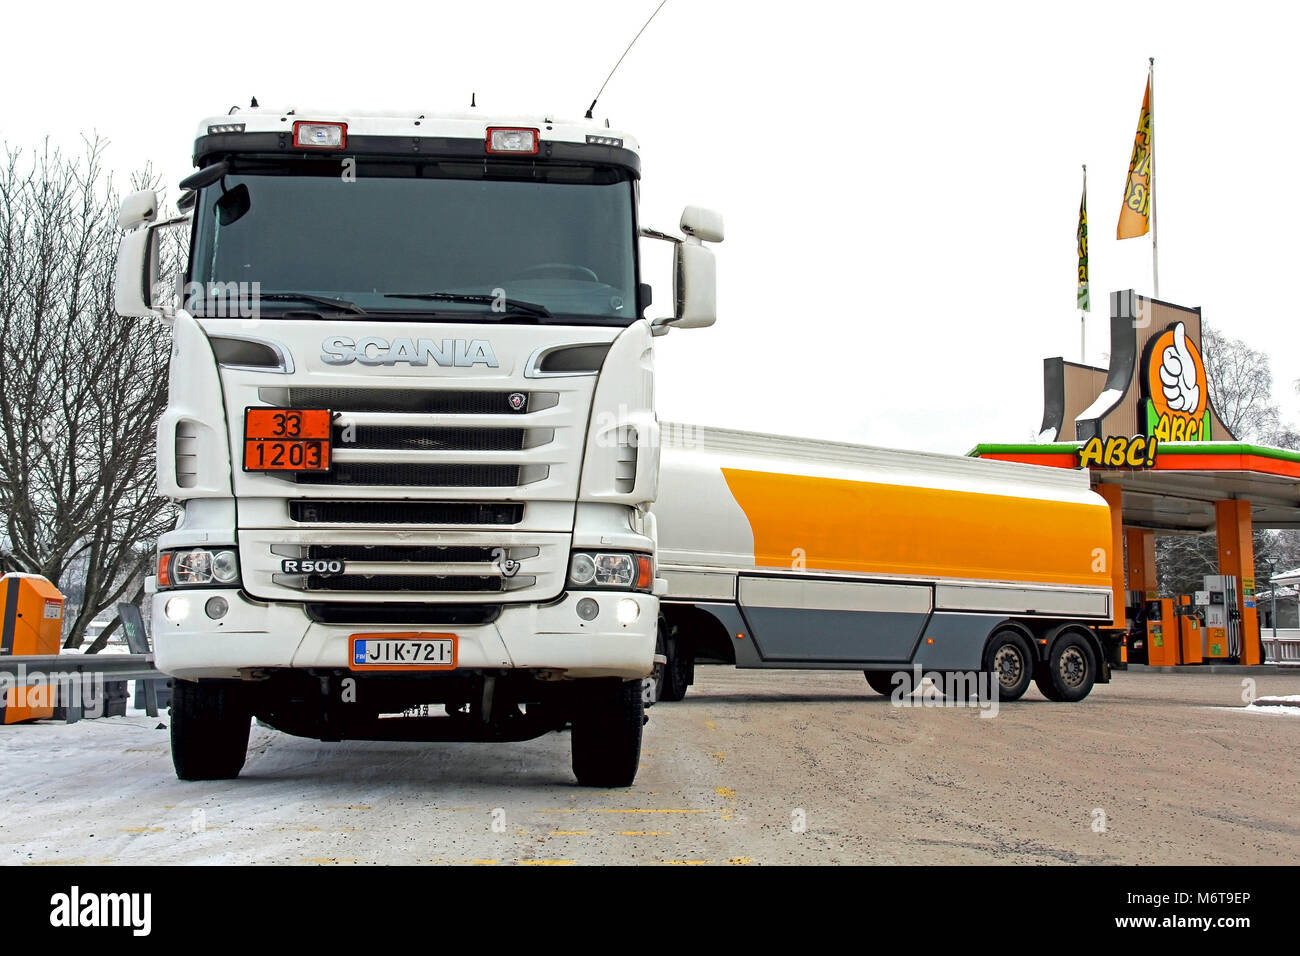 SOMERO, FINLAND - JANUARY 25, 2014: Scania R500 tanker truck unloads fuel at a petrol station. Due to higher excise taxes, the prices of fuel are on t Stock Photo